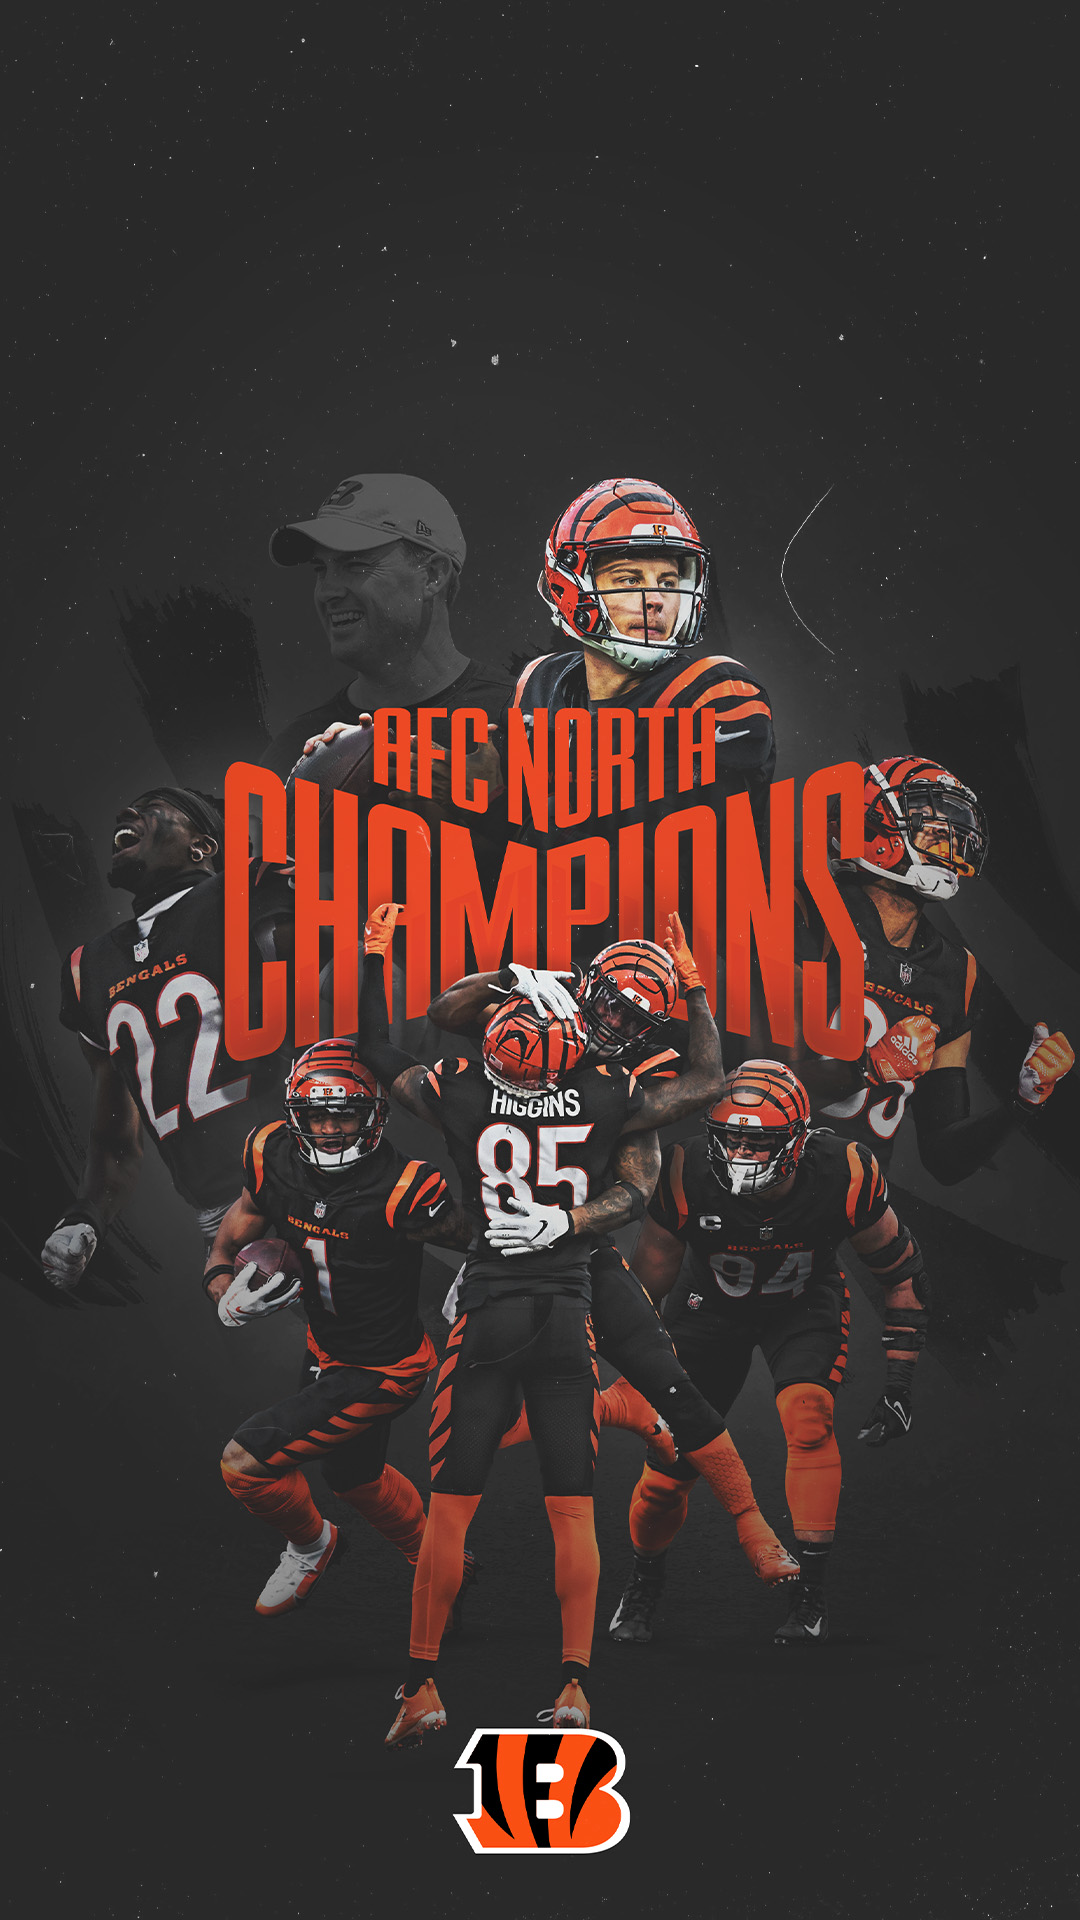 Cincinnati Bengals you might want to update your wallpaper. #WallpaperWednesday x #RuleTheJungle